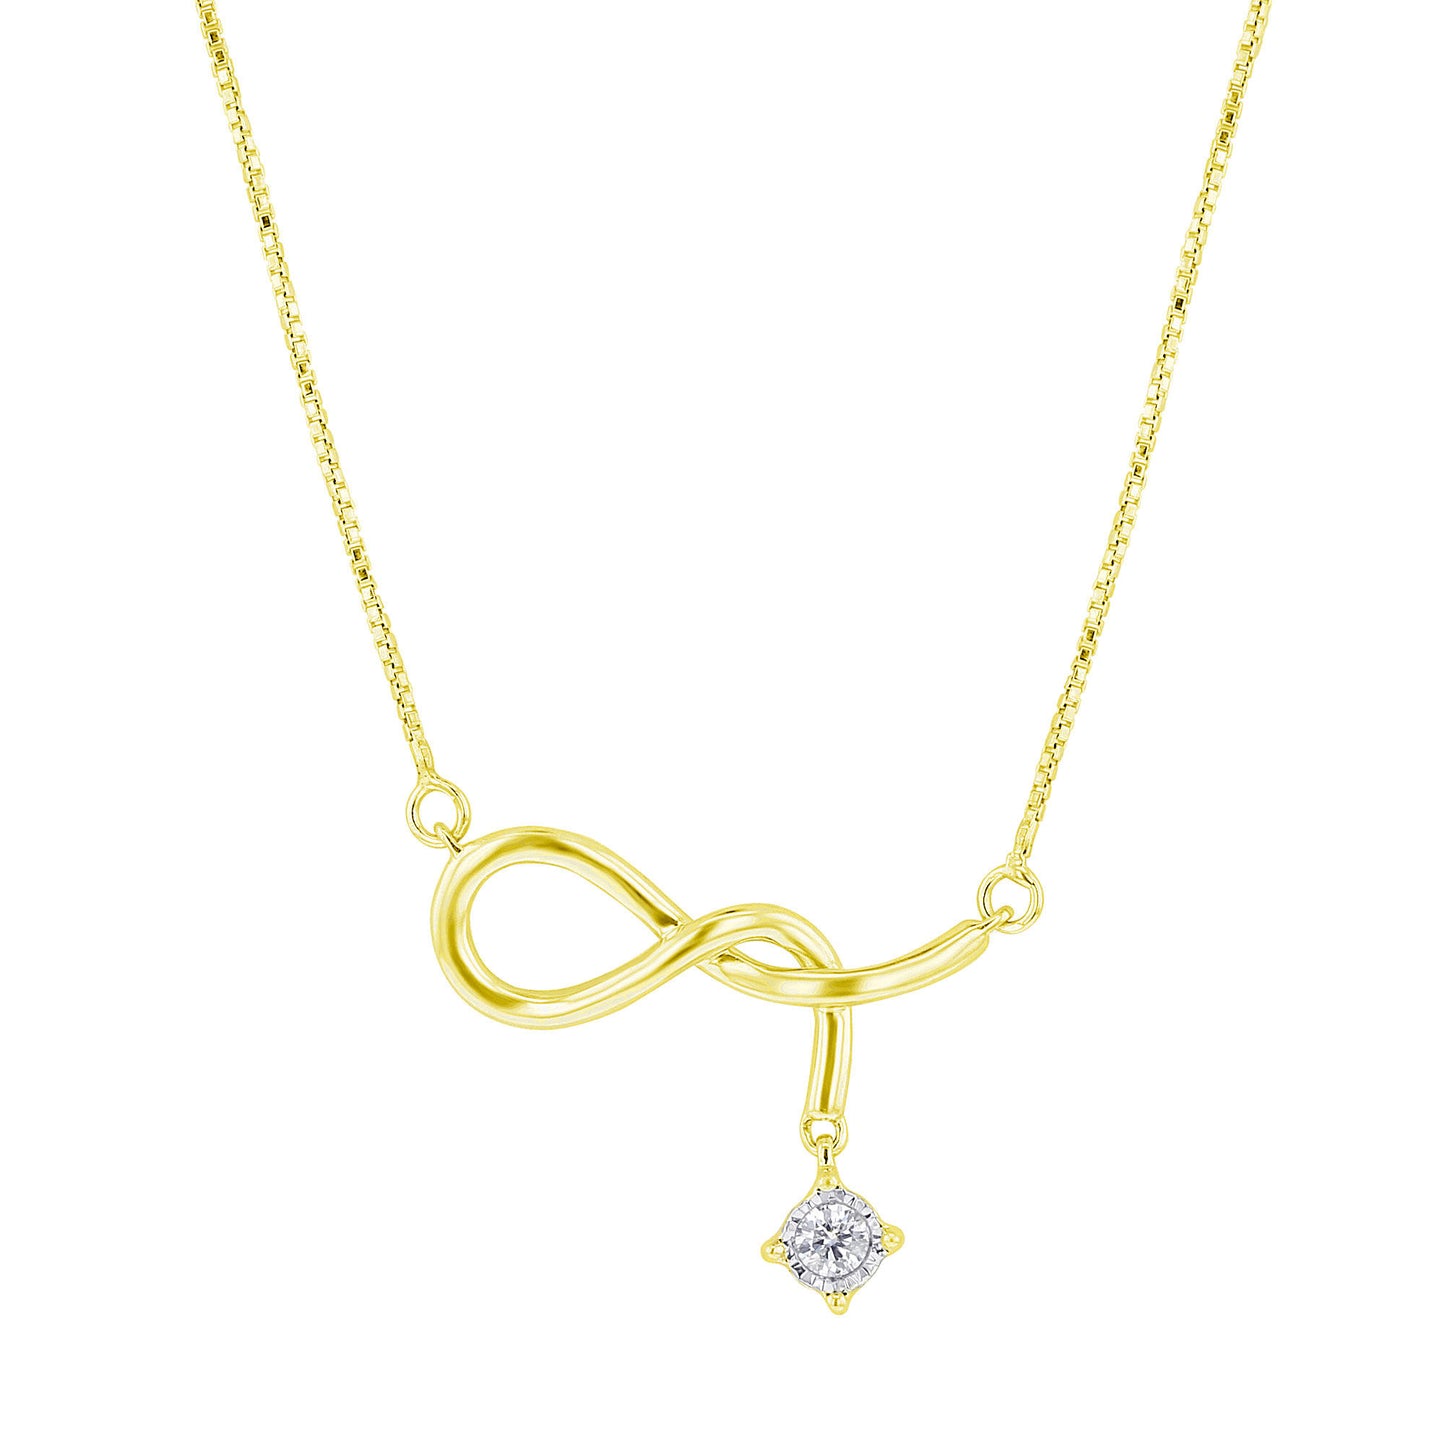 Naughty Knot Gold and Diamond Necklace